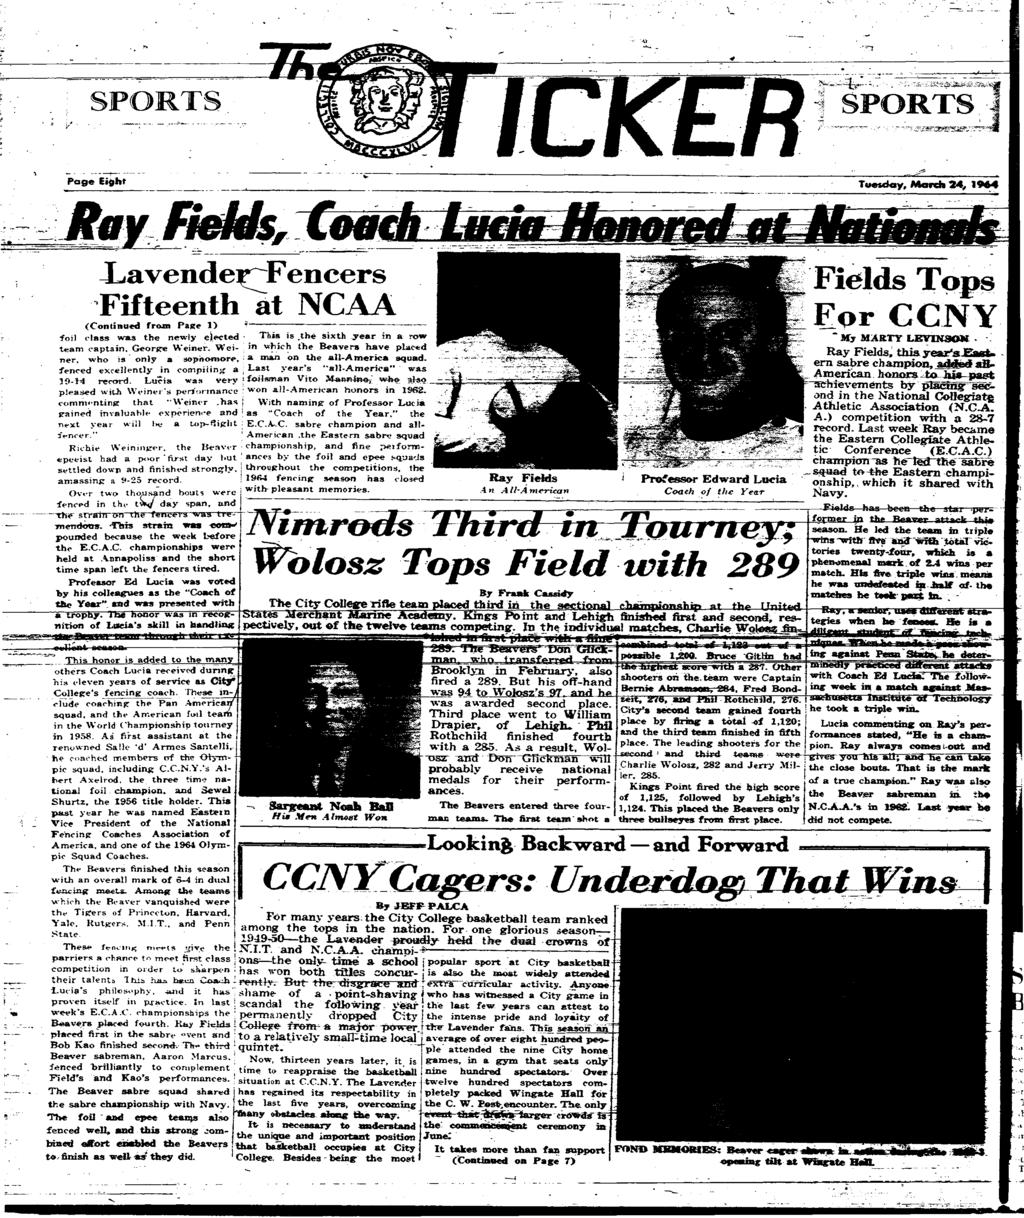 '.n SPORTS J%tm *..*c; 'no**' SPORTS *$ ^ %?!3?%?. Page Eight Tuesday, Mach 24, 1964 Ray Fields, G if i ' i i *i M S m JLavende^F< Fifteenth at NCAA (Continued fom Page 1) foil class was the newly ejected team captain, Geoge Weine.